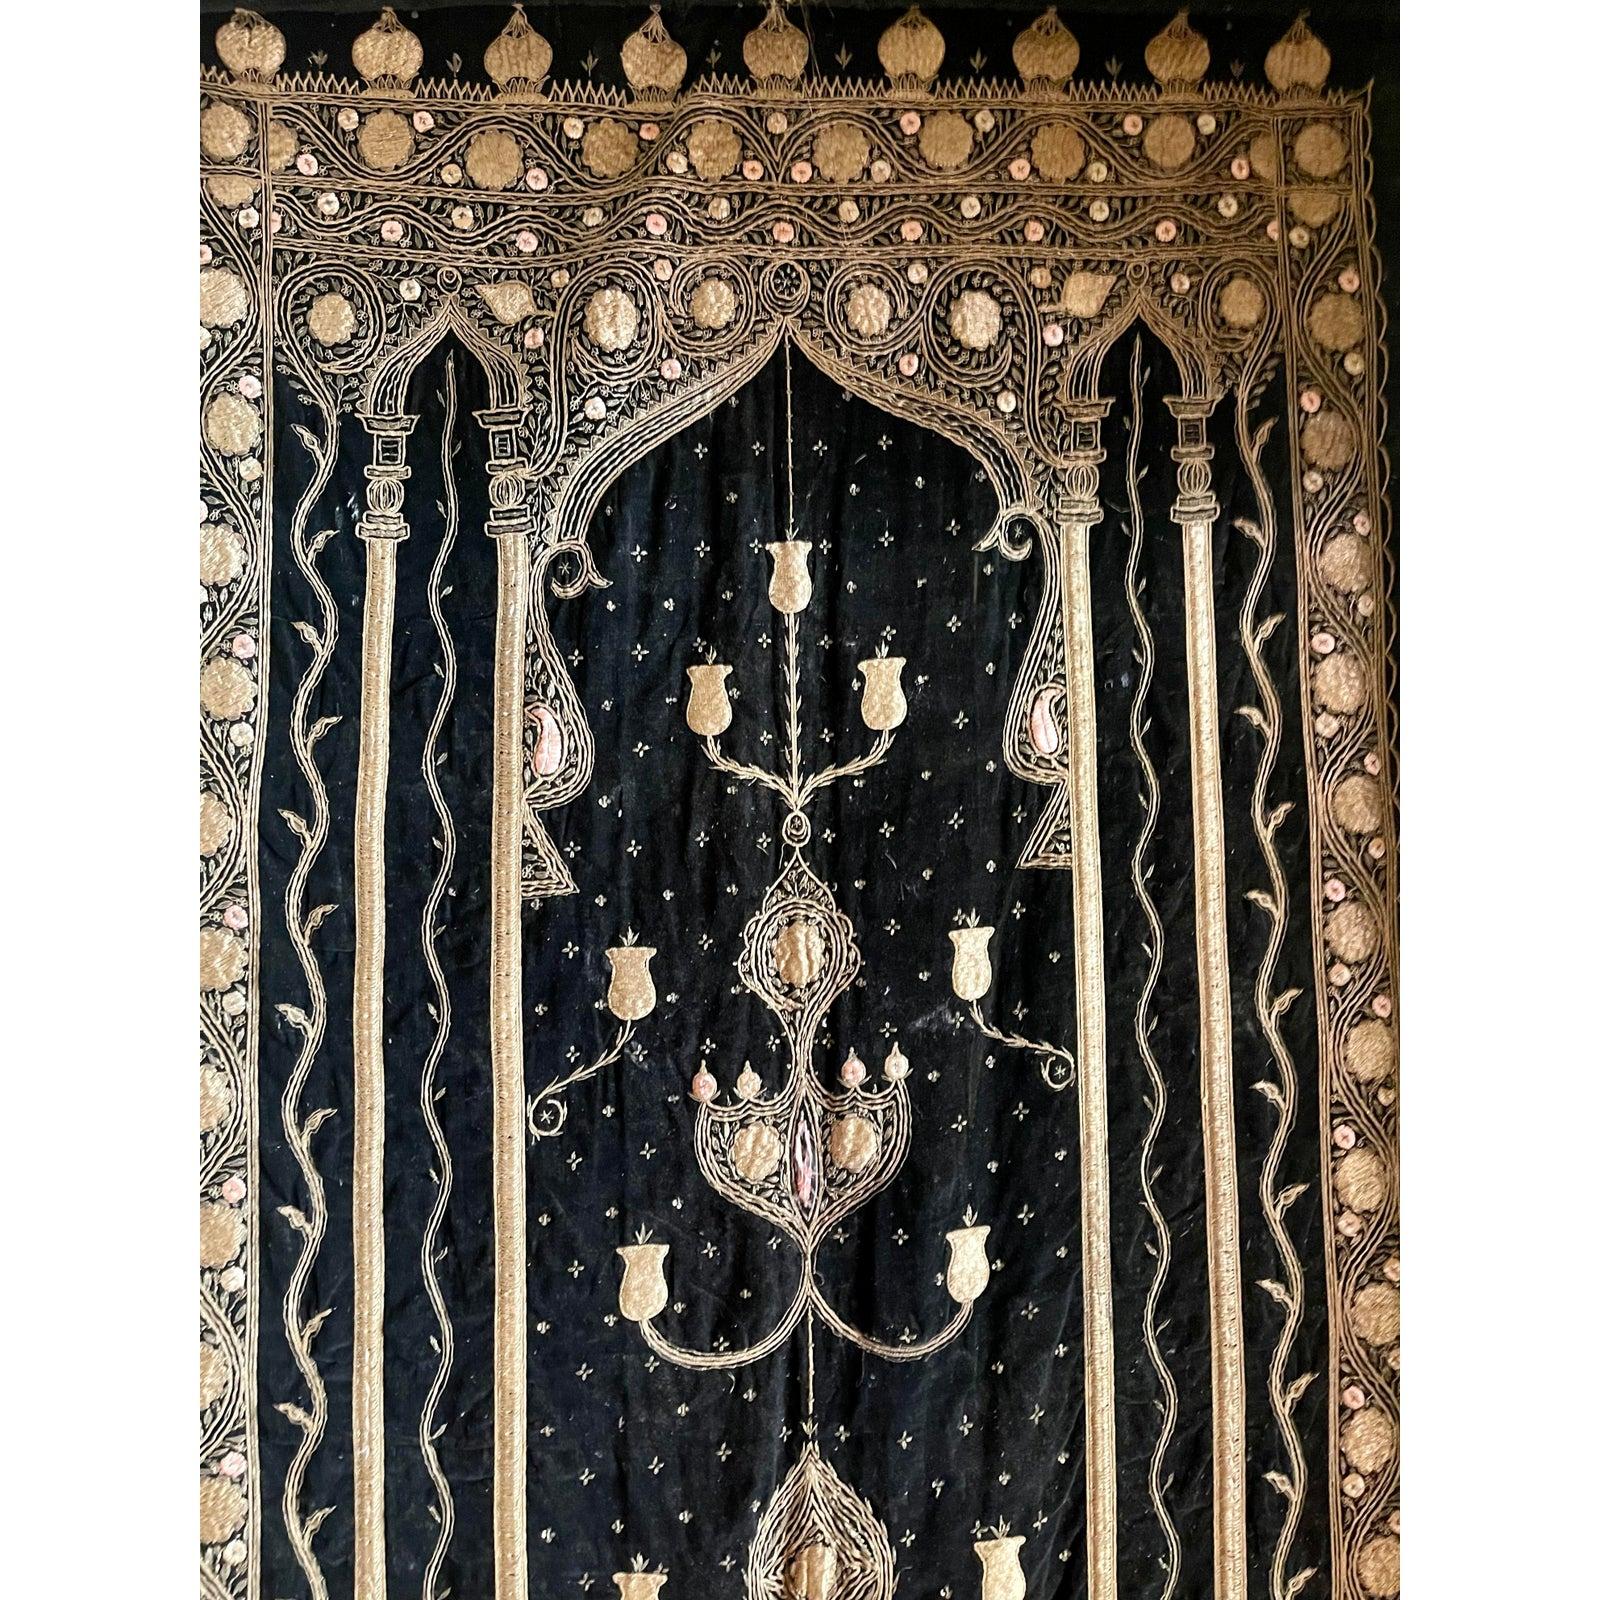 Antique Moroccan textile black & gold tapestry

Additional information:
Materials: Gold, Textile
Color: Black
Styled After: Martyn Lawrence Bullard, Tony Duquette
Period: 19th Century
Styles: Asian Antique
Item Type: Vintage, Antique or